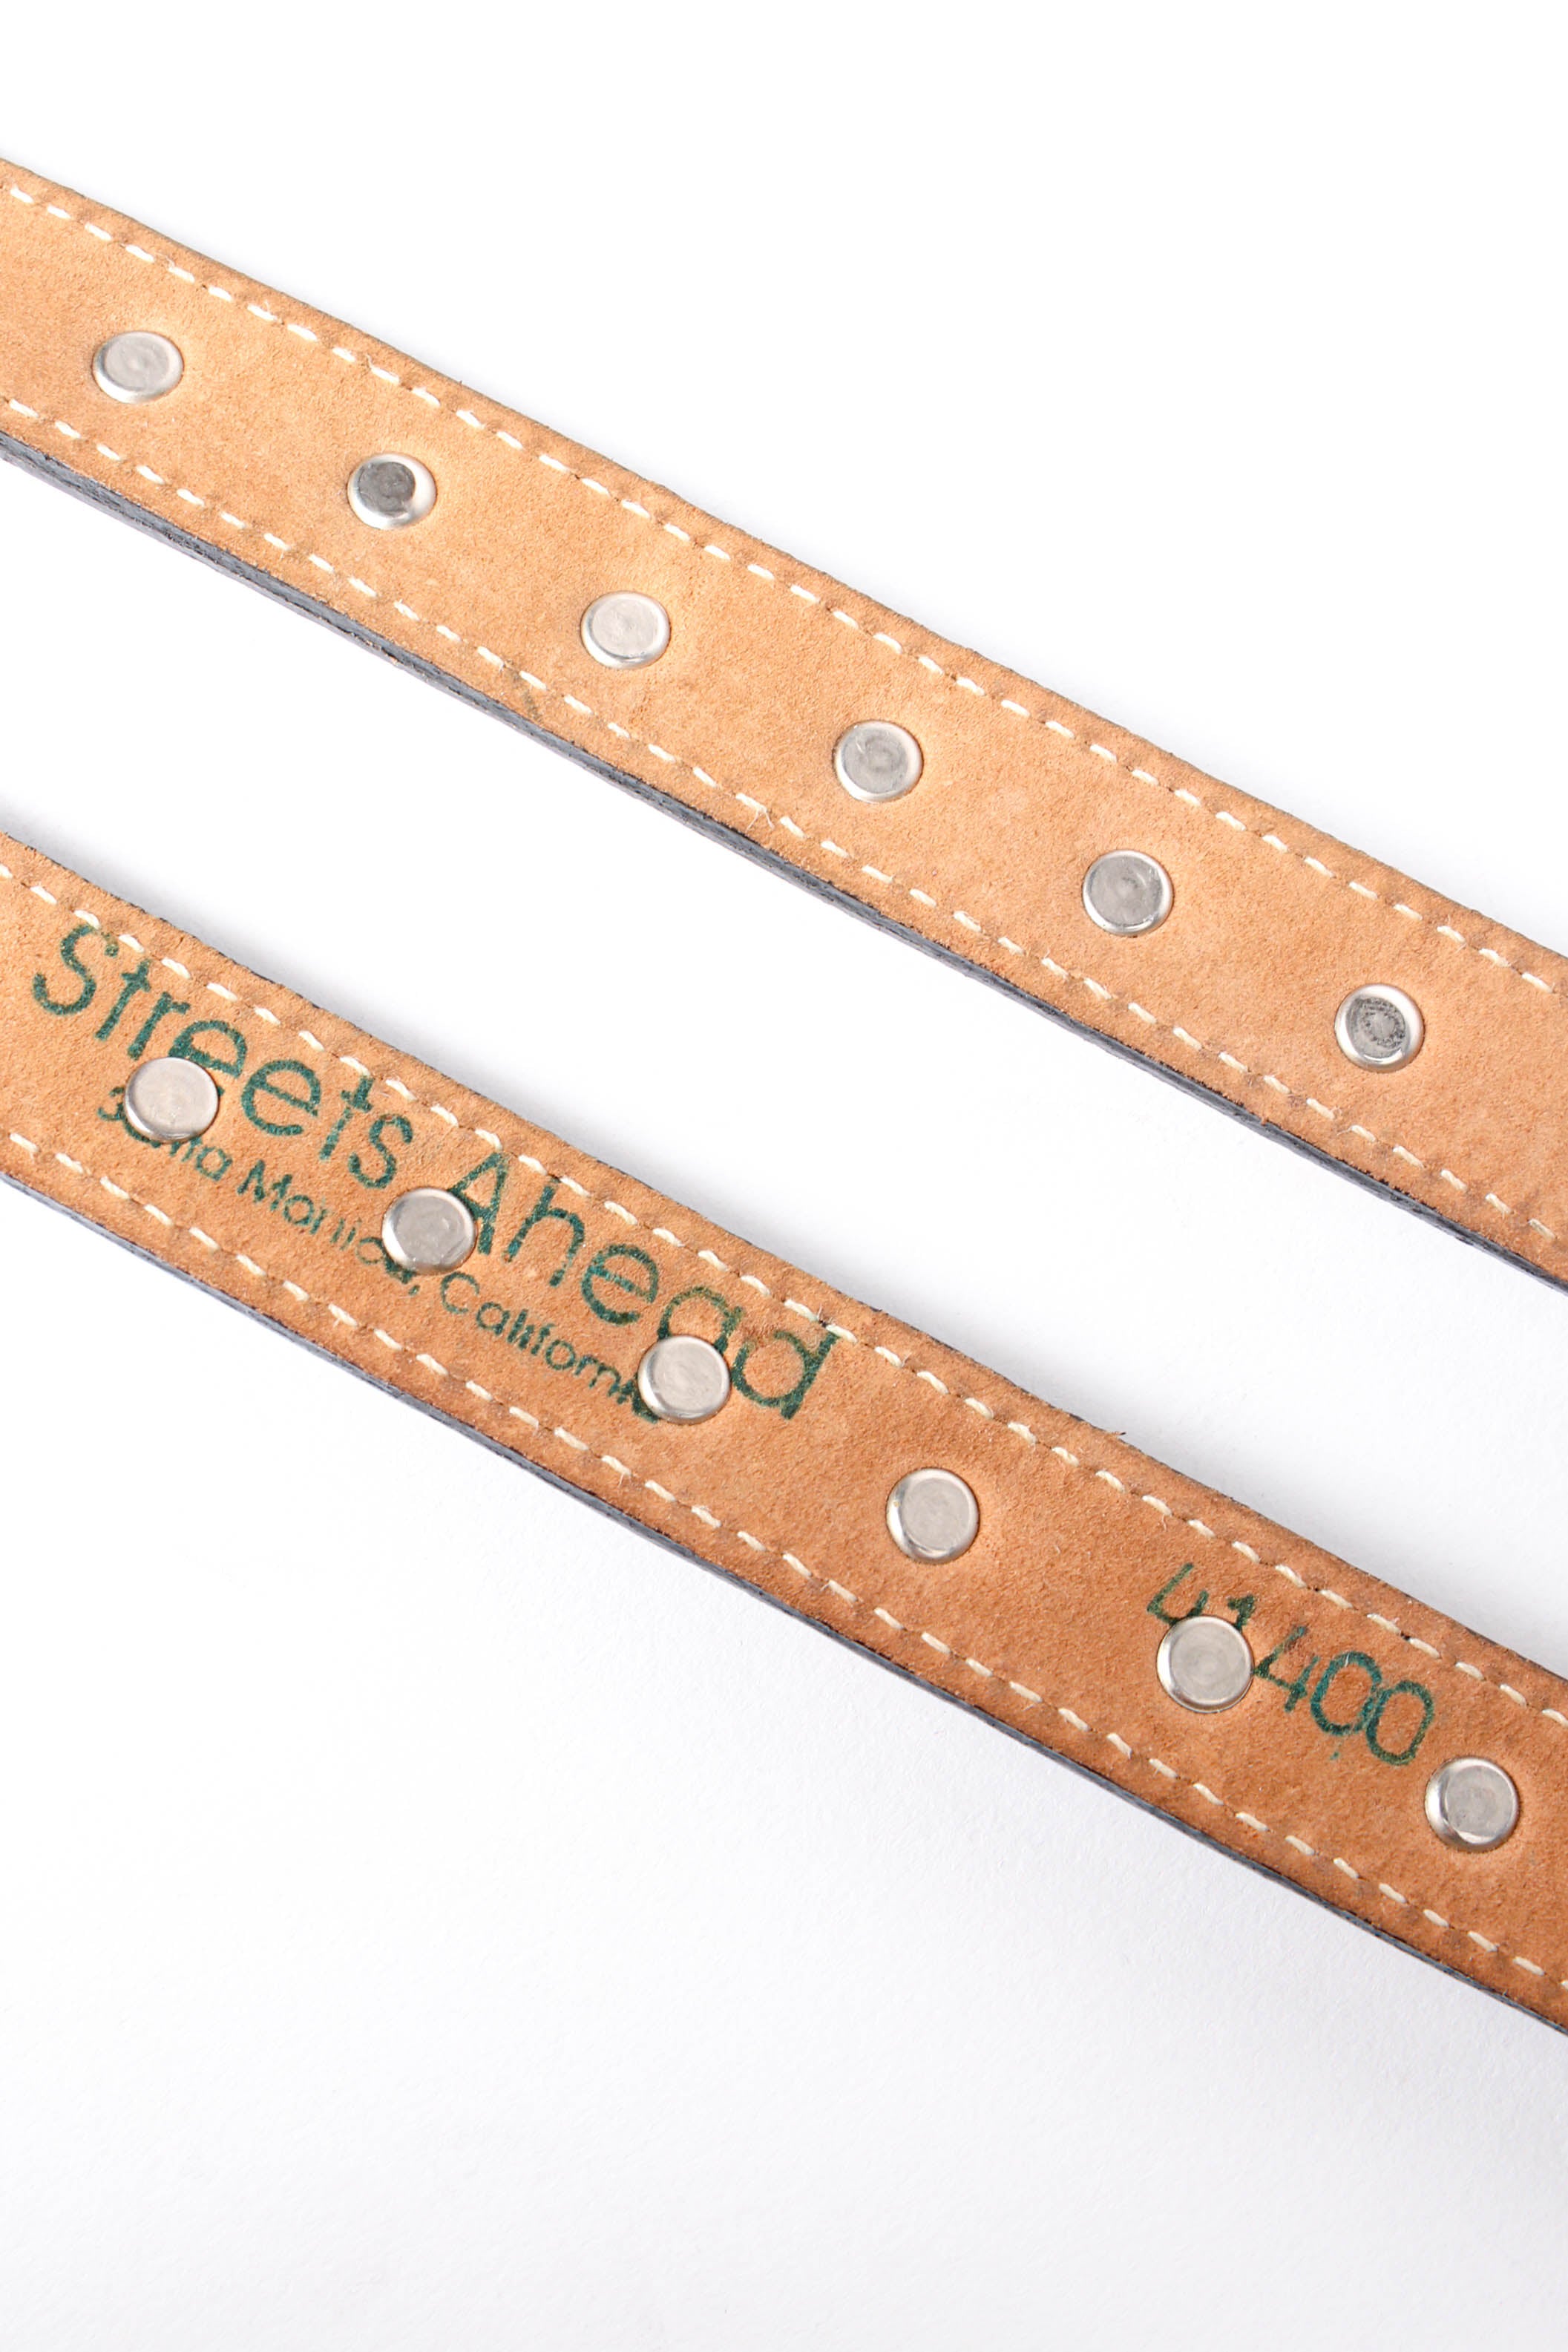 Vintage Streets Ahead Double Strapped Statement Medallion Belt signature at Recess Los Angeles